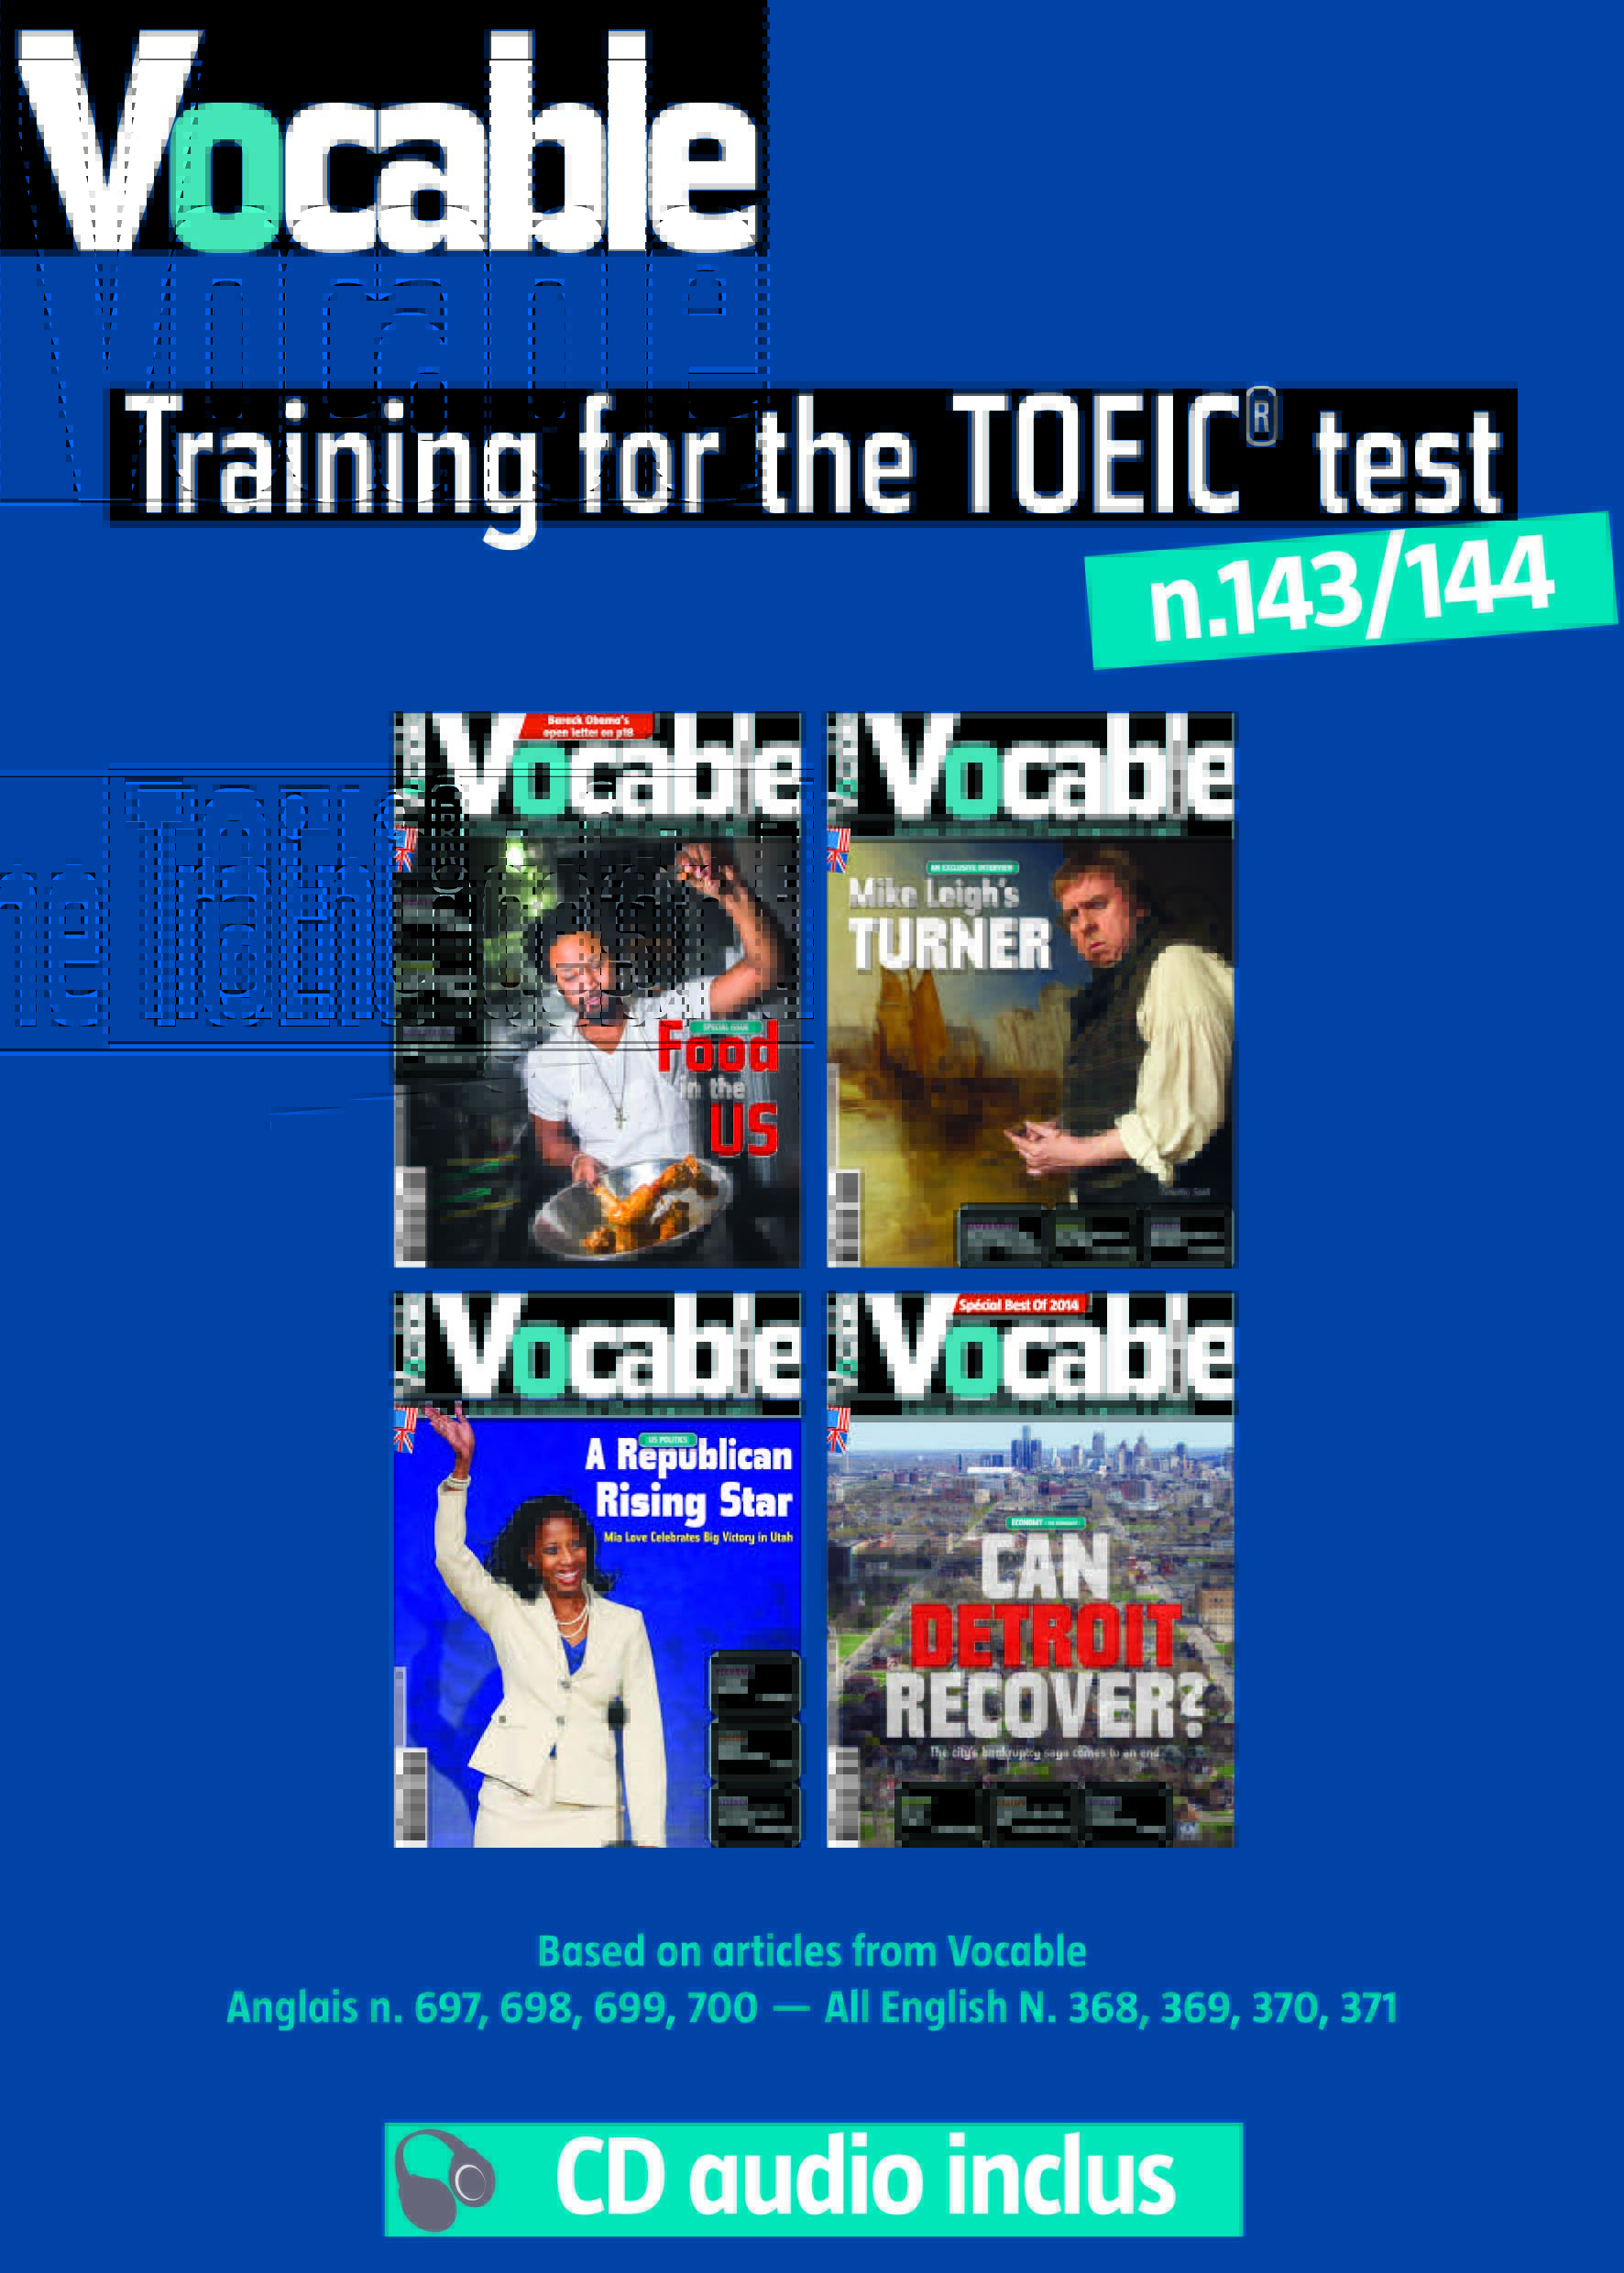 Vocable Training for the TOEIC® test